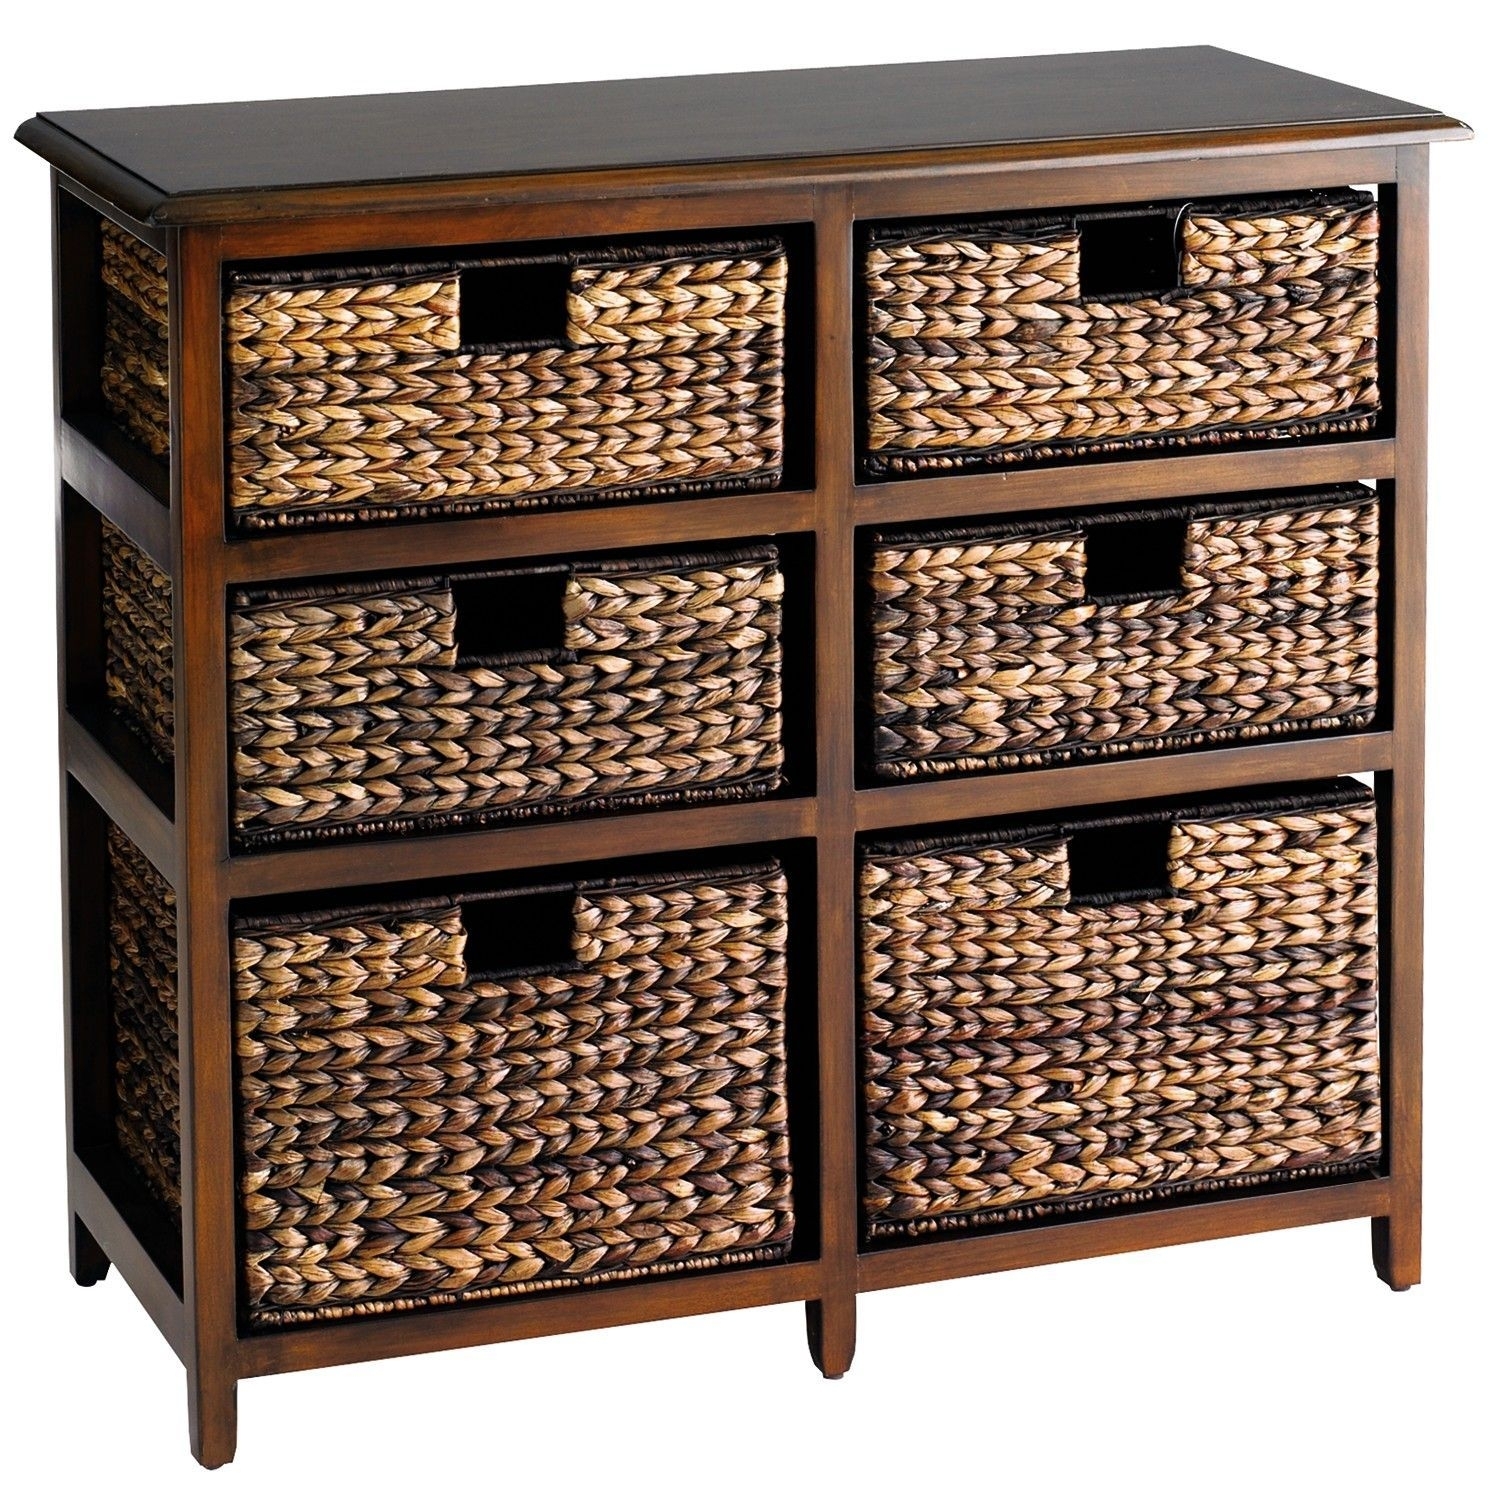 Wicker Storage Chests Ideas On Foter